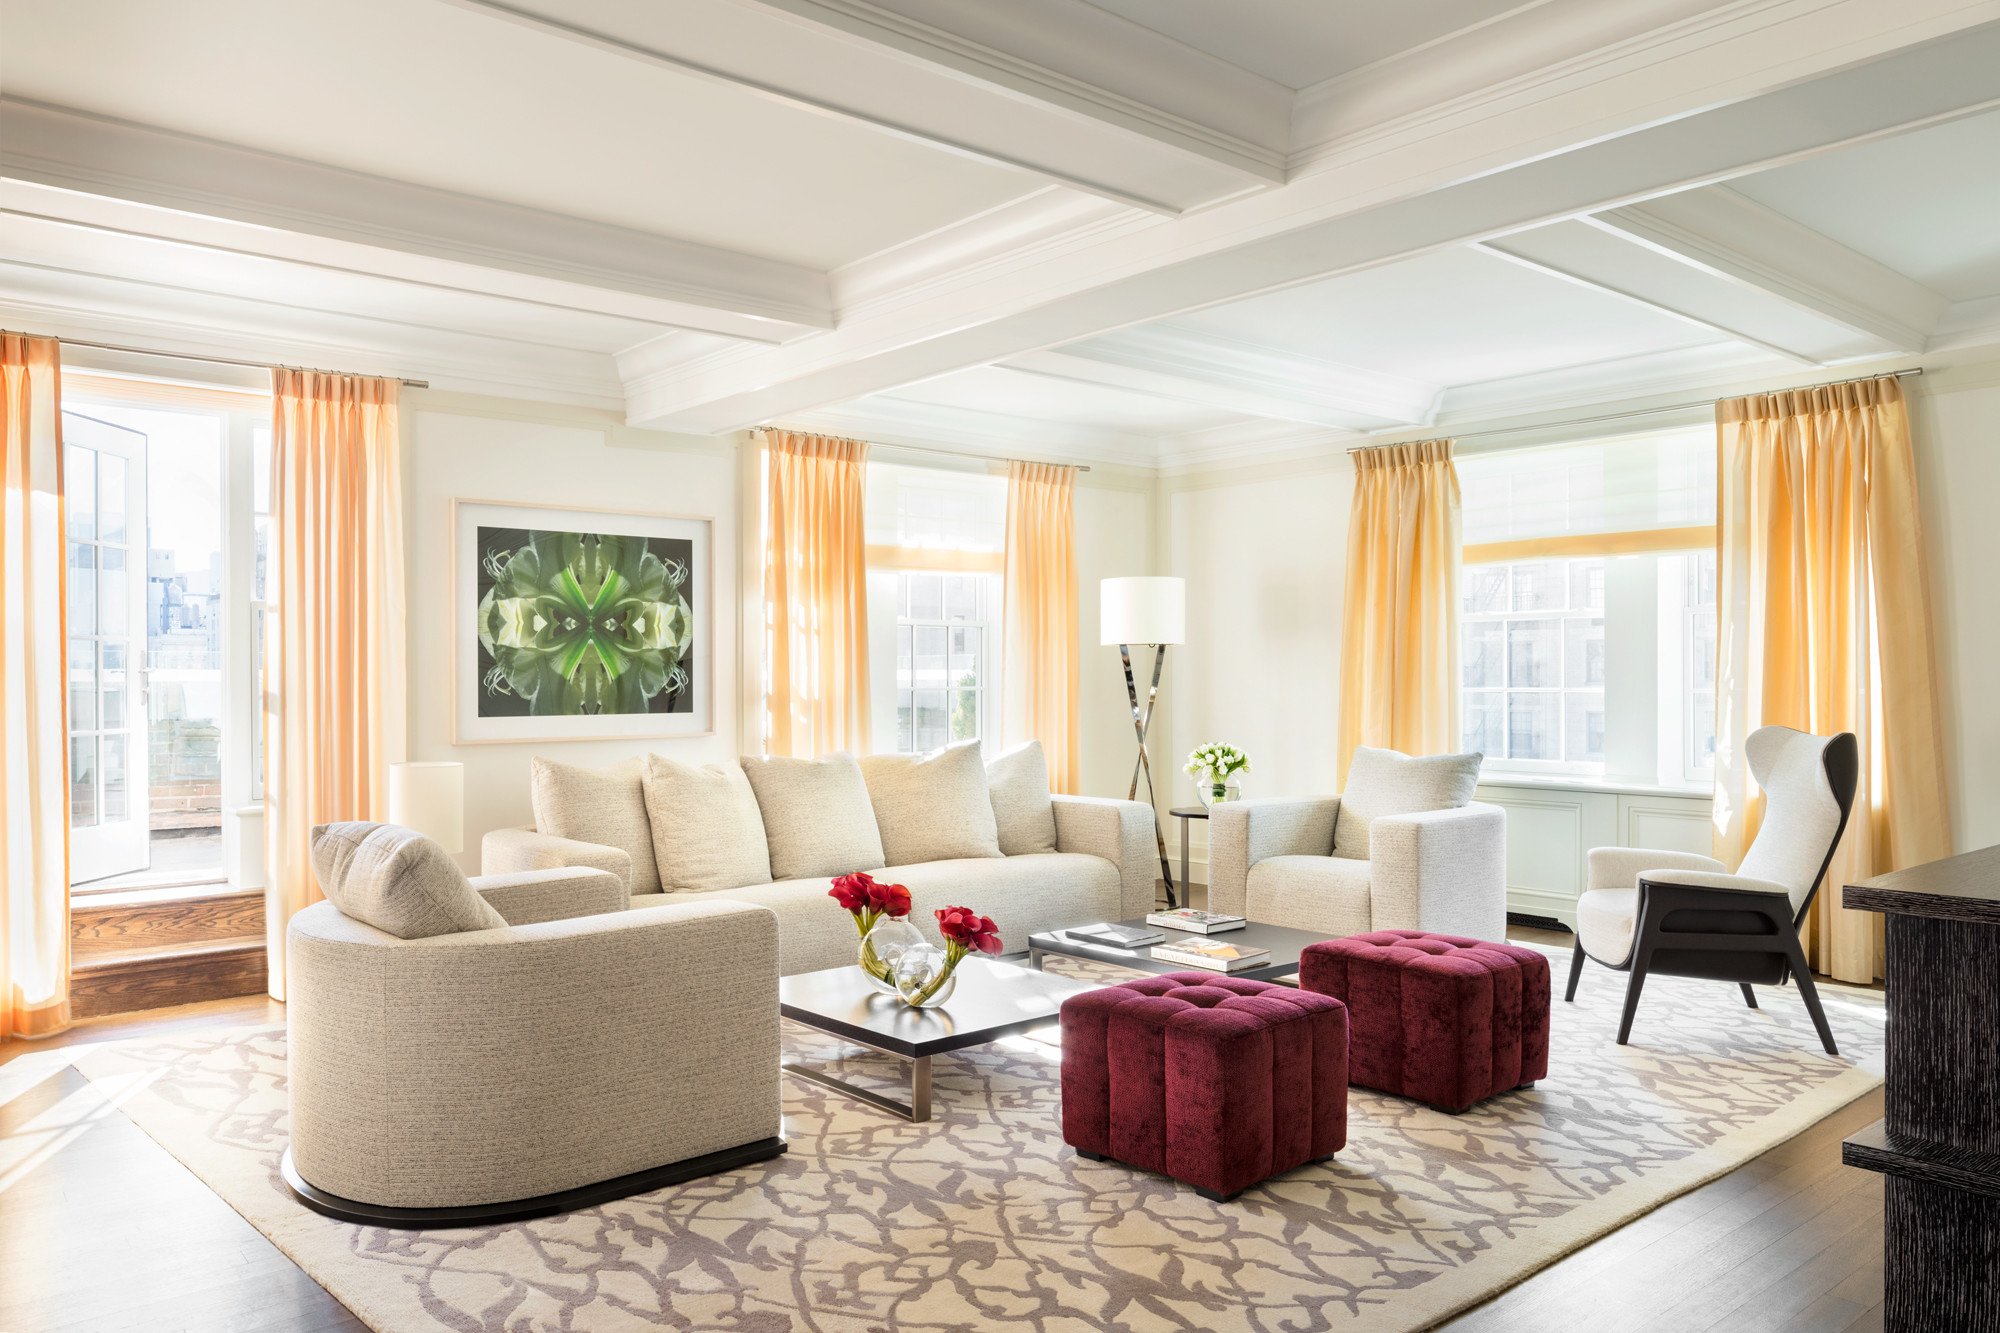 Suite Profile: The Five Bedroom Terrace Suite at The Mark NYC